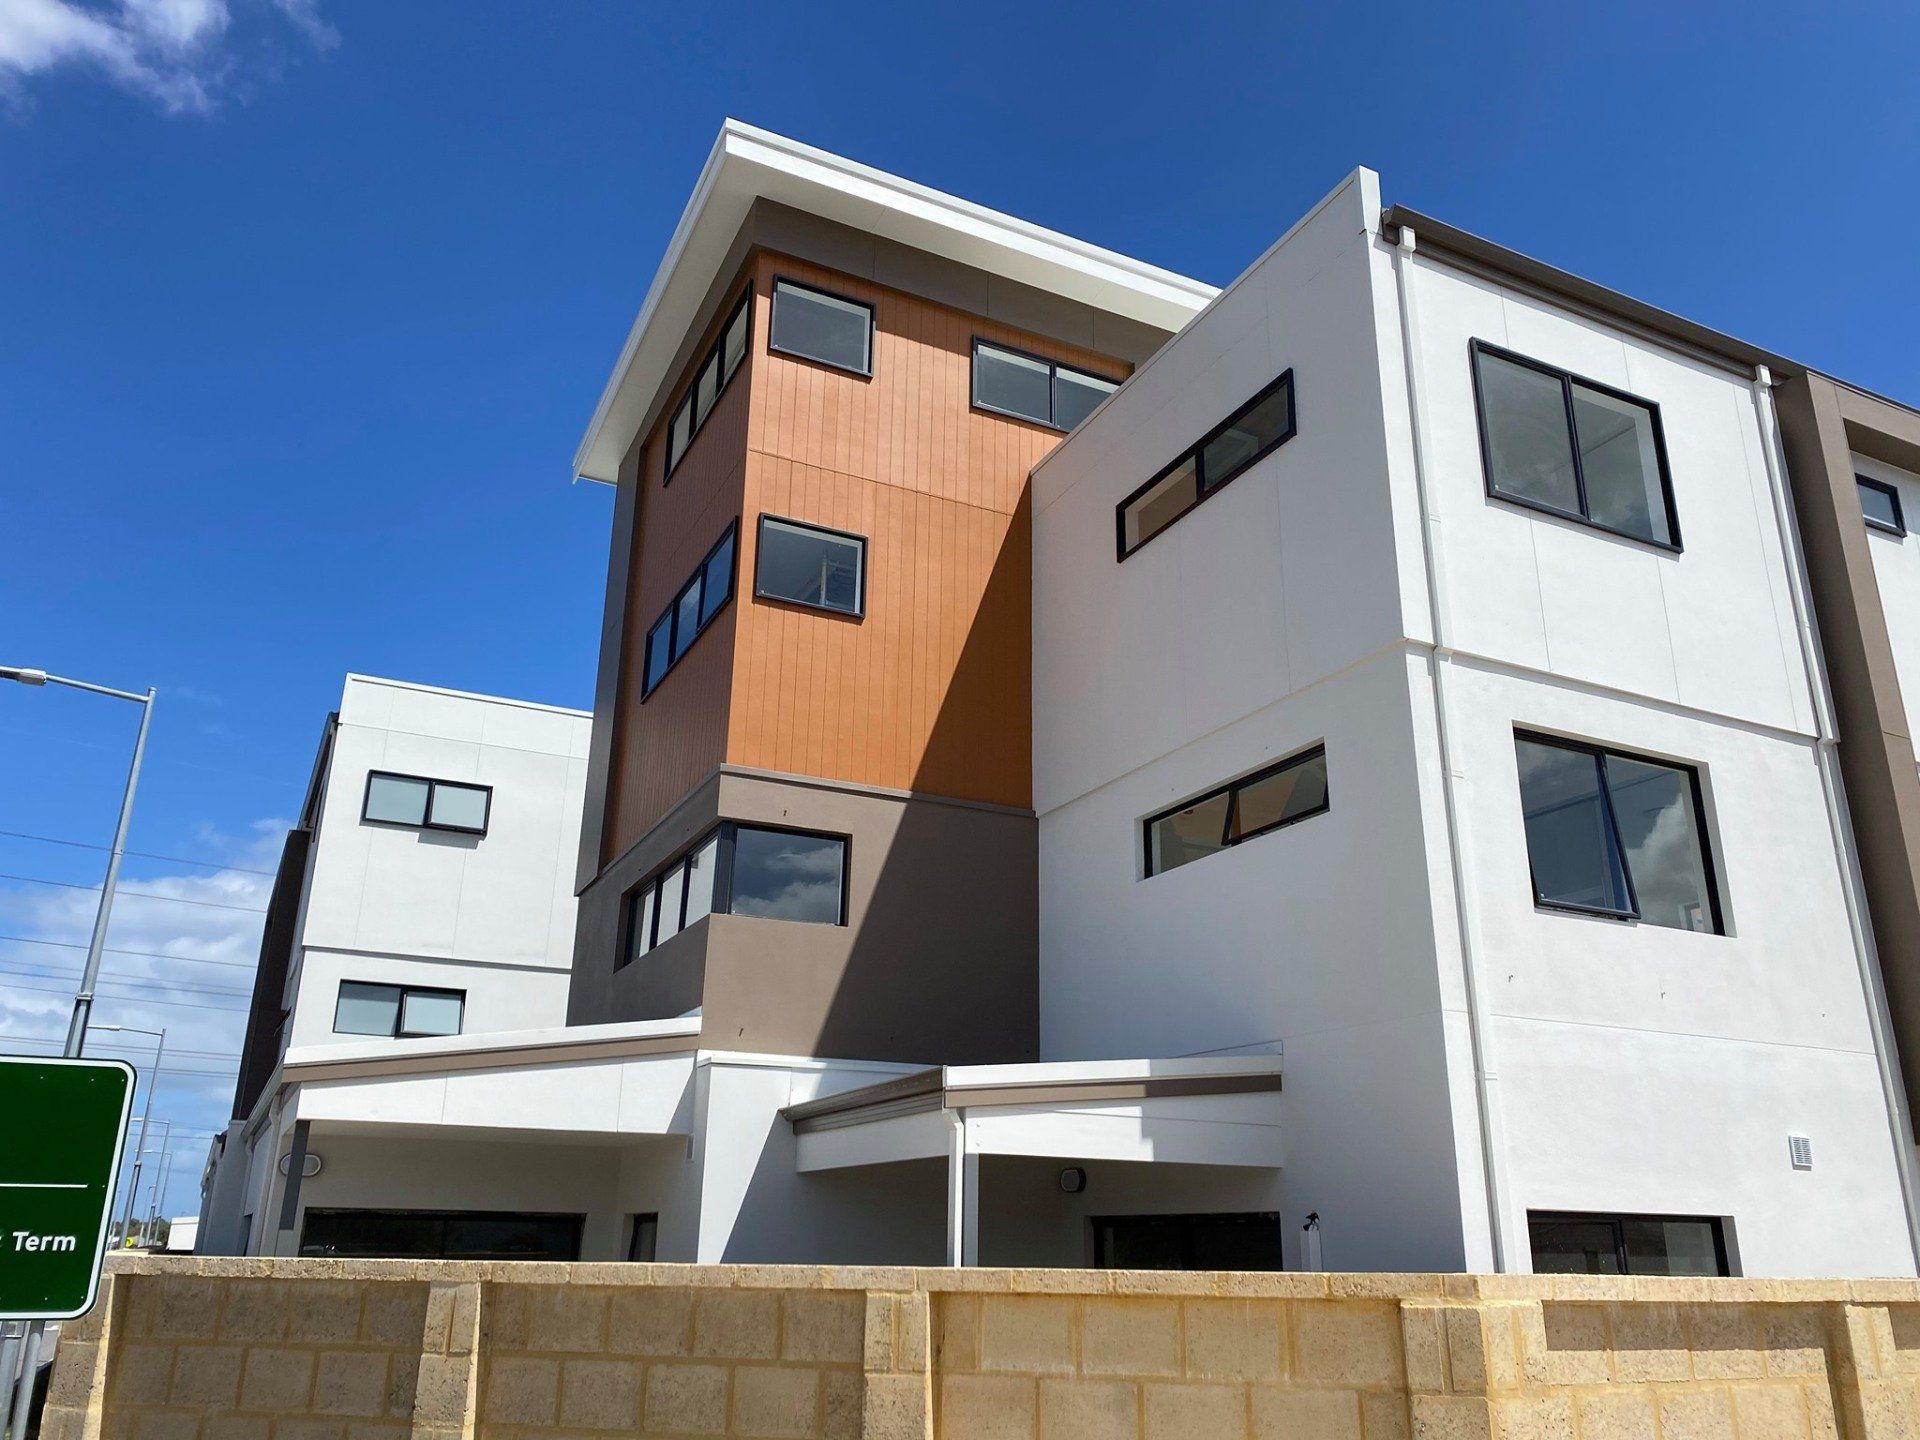 Apartment Building - Canning Vale, WA - Accredit Building Surveying & Construction Services Pty Ltd